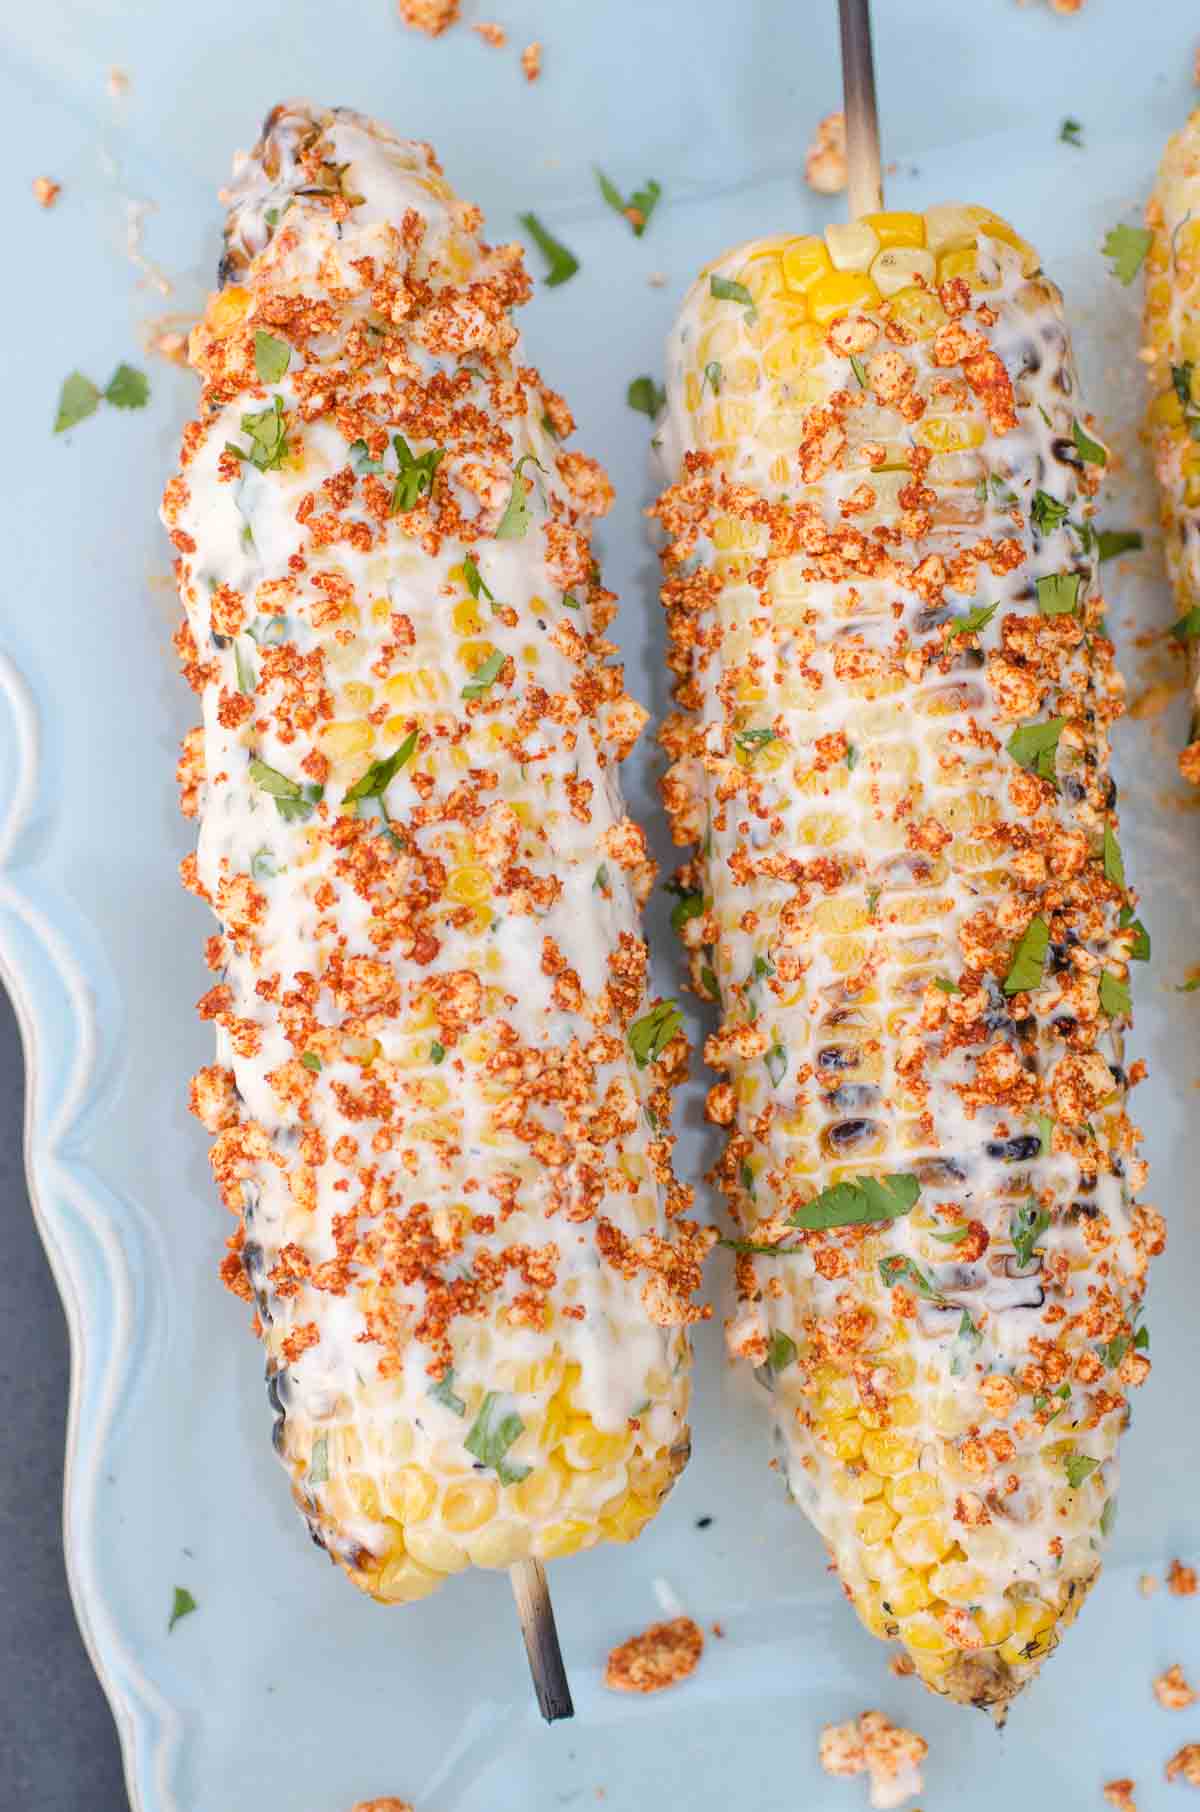 grilled corn on cob on skewers with creamy sauce